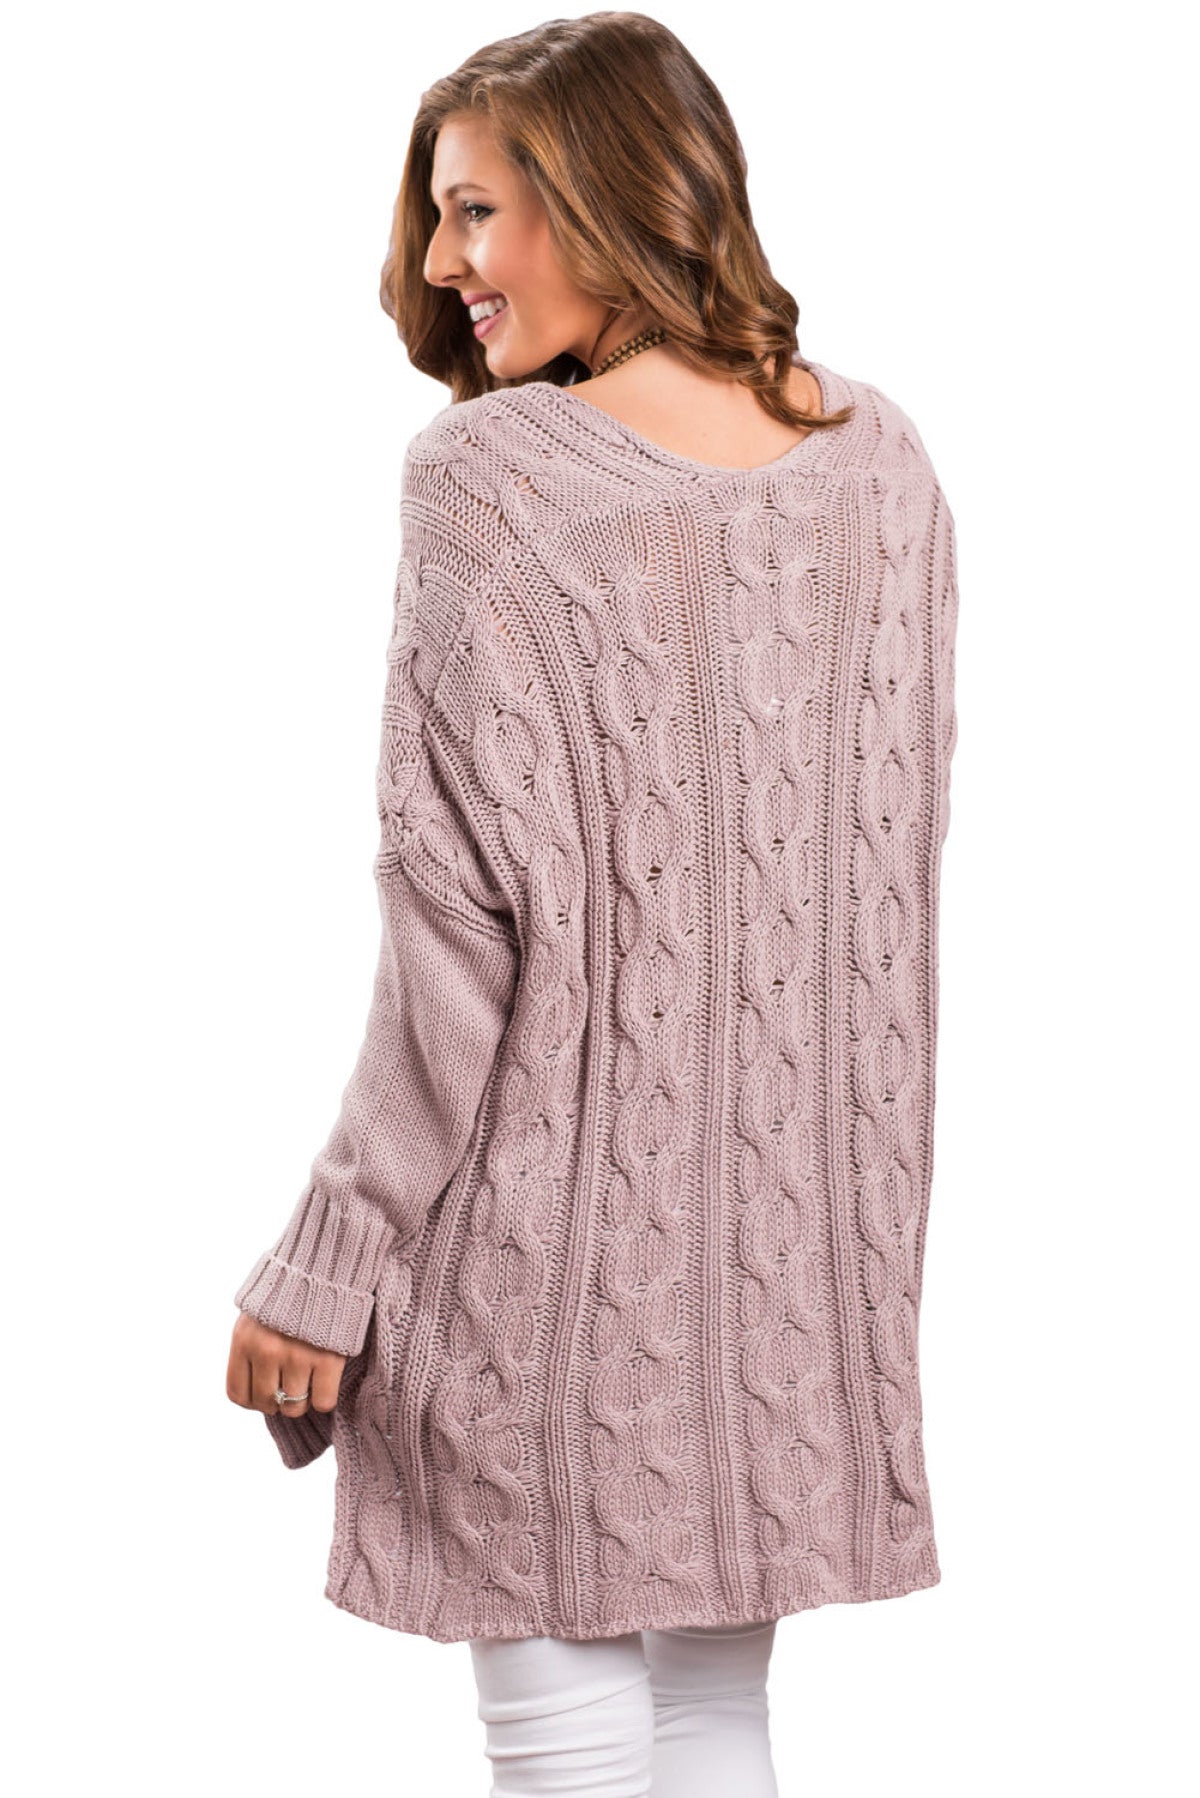 Oversized Cozy up Knit Sweater - Passion of Essence Boutique